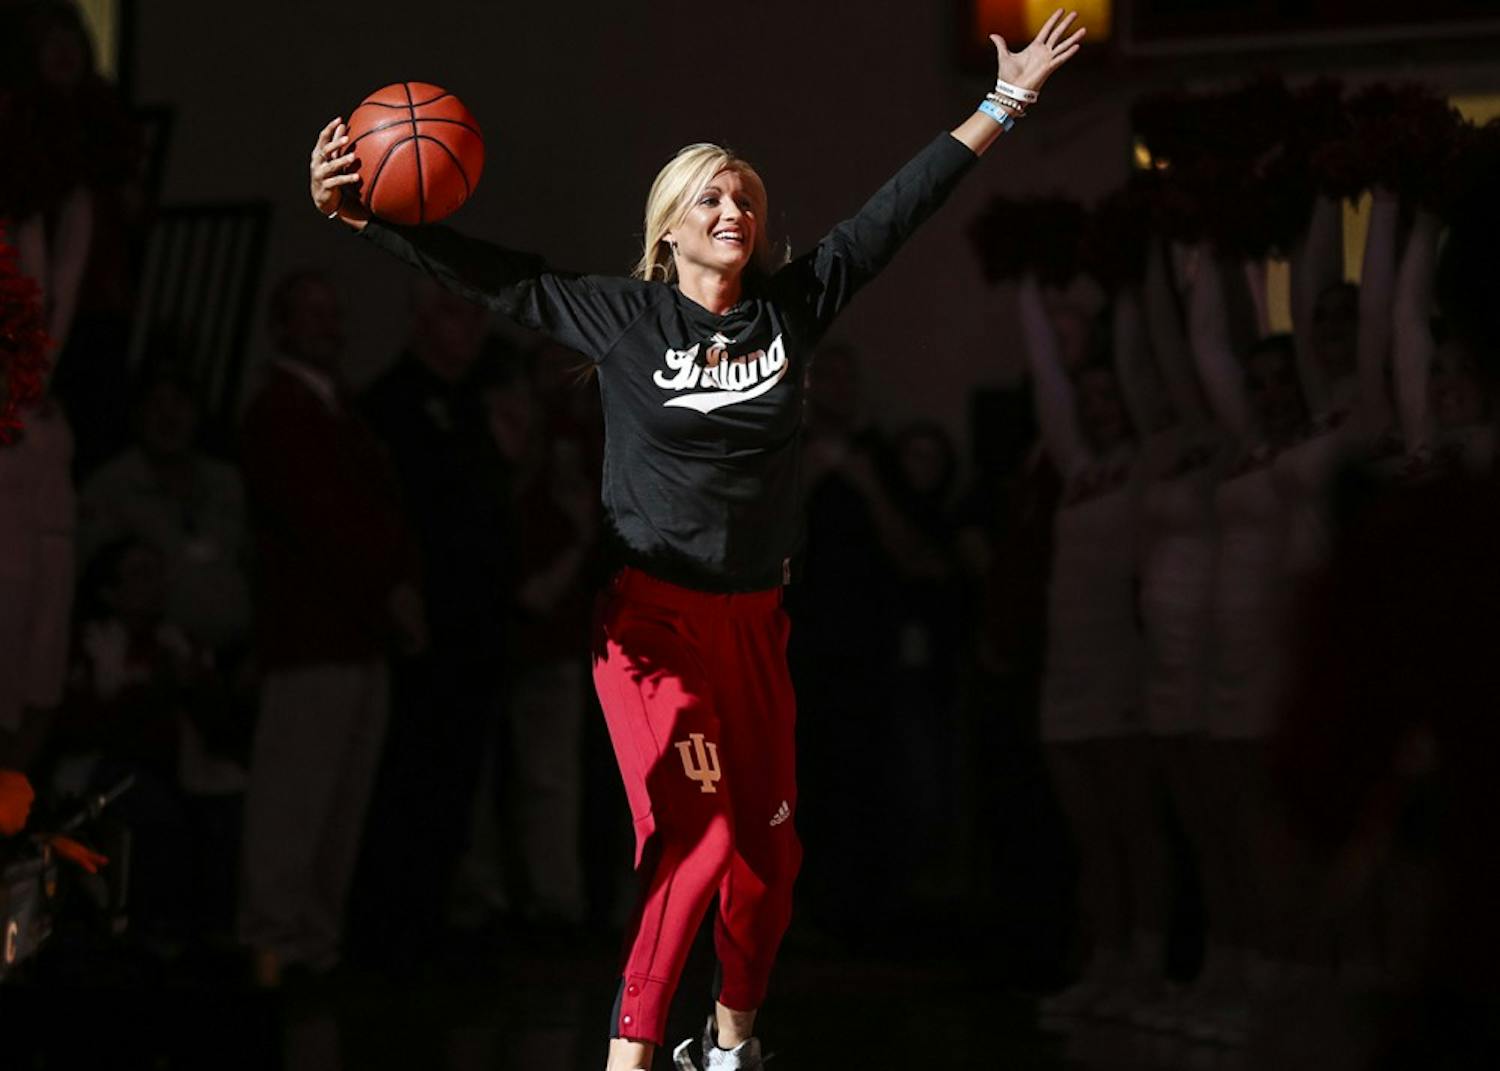 Senior guard Tyra Buss enters Branch McCracken Court during Hoosier Hysteria on Oct. 21. Buss surpassed Denise Jackson as the all-time scorer for IU in women's program history with 1,931 points on Jan. 3 against Penn State.&nbsp;